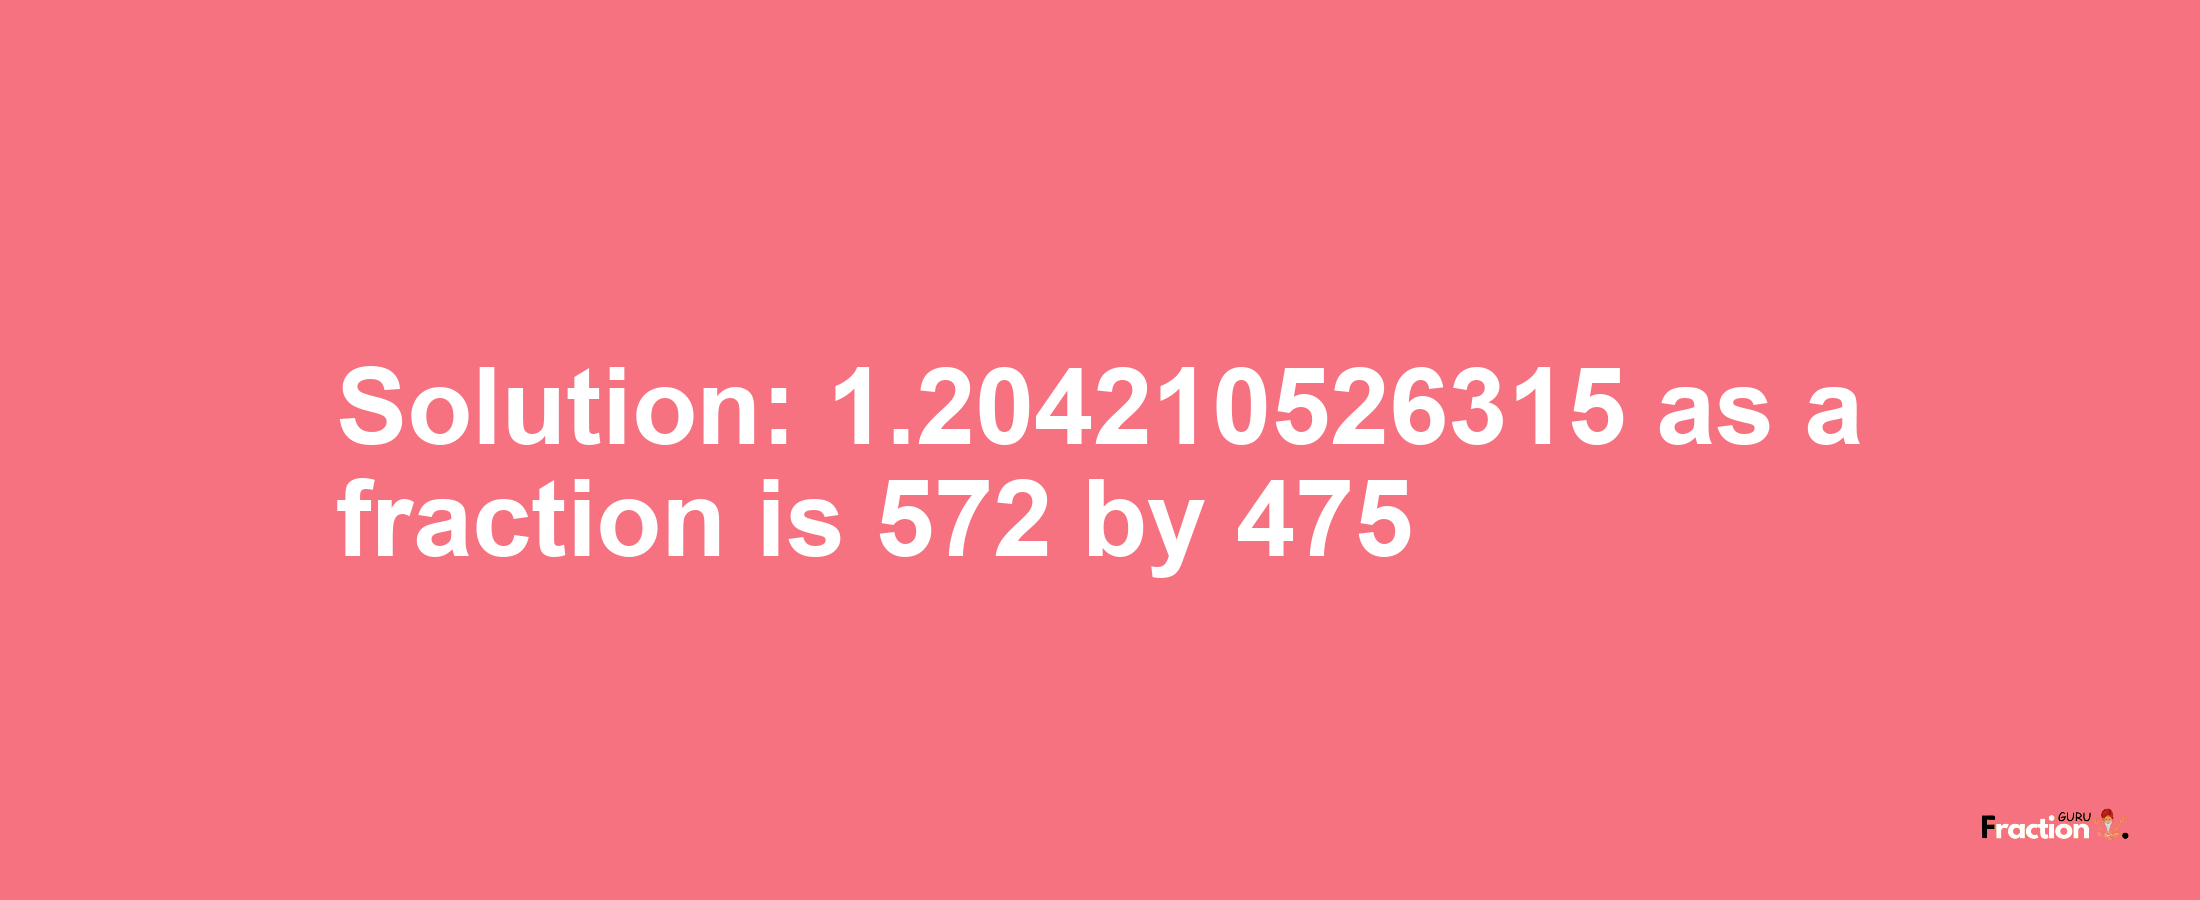 Solution:1.204210526315 as a fraction is 572/475